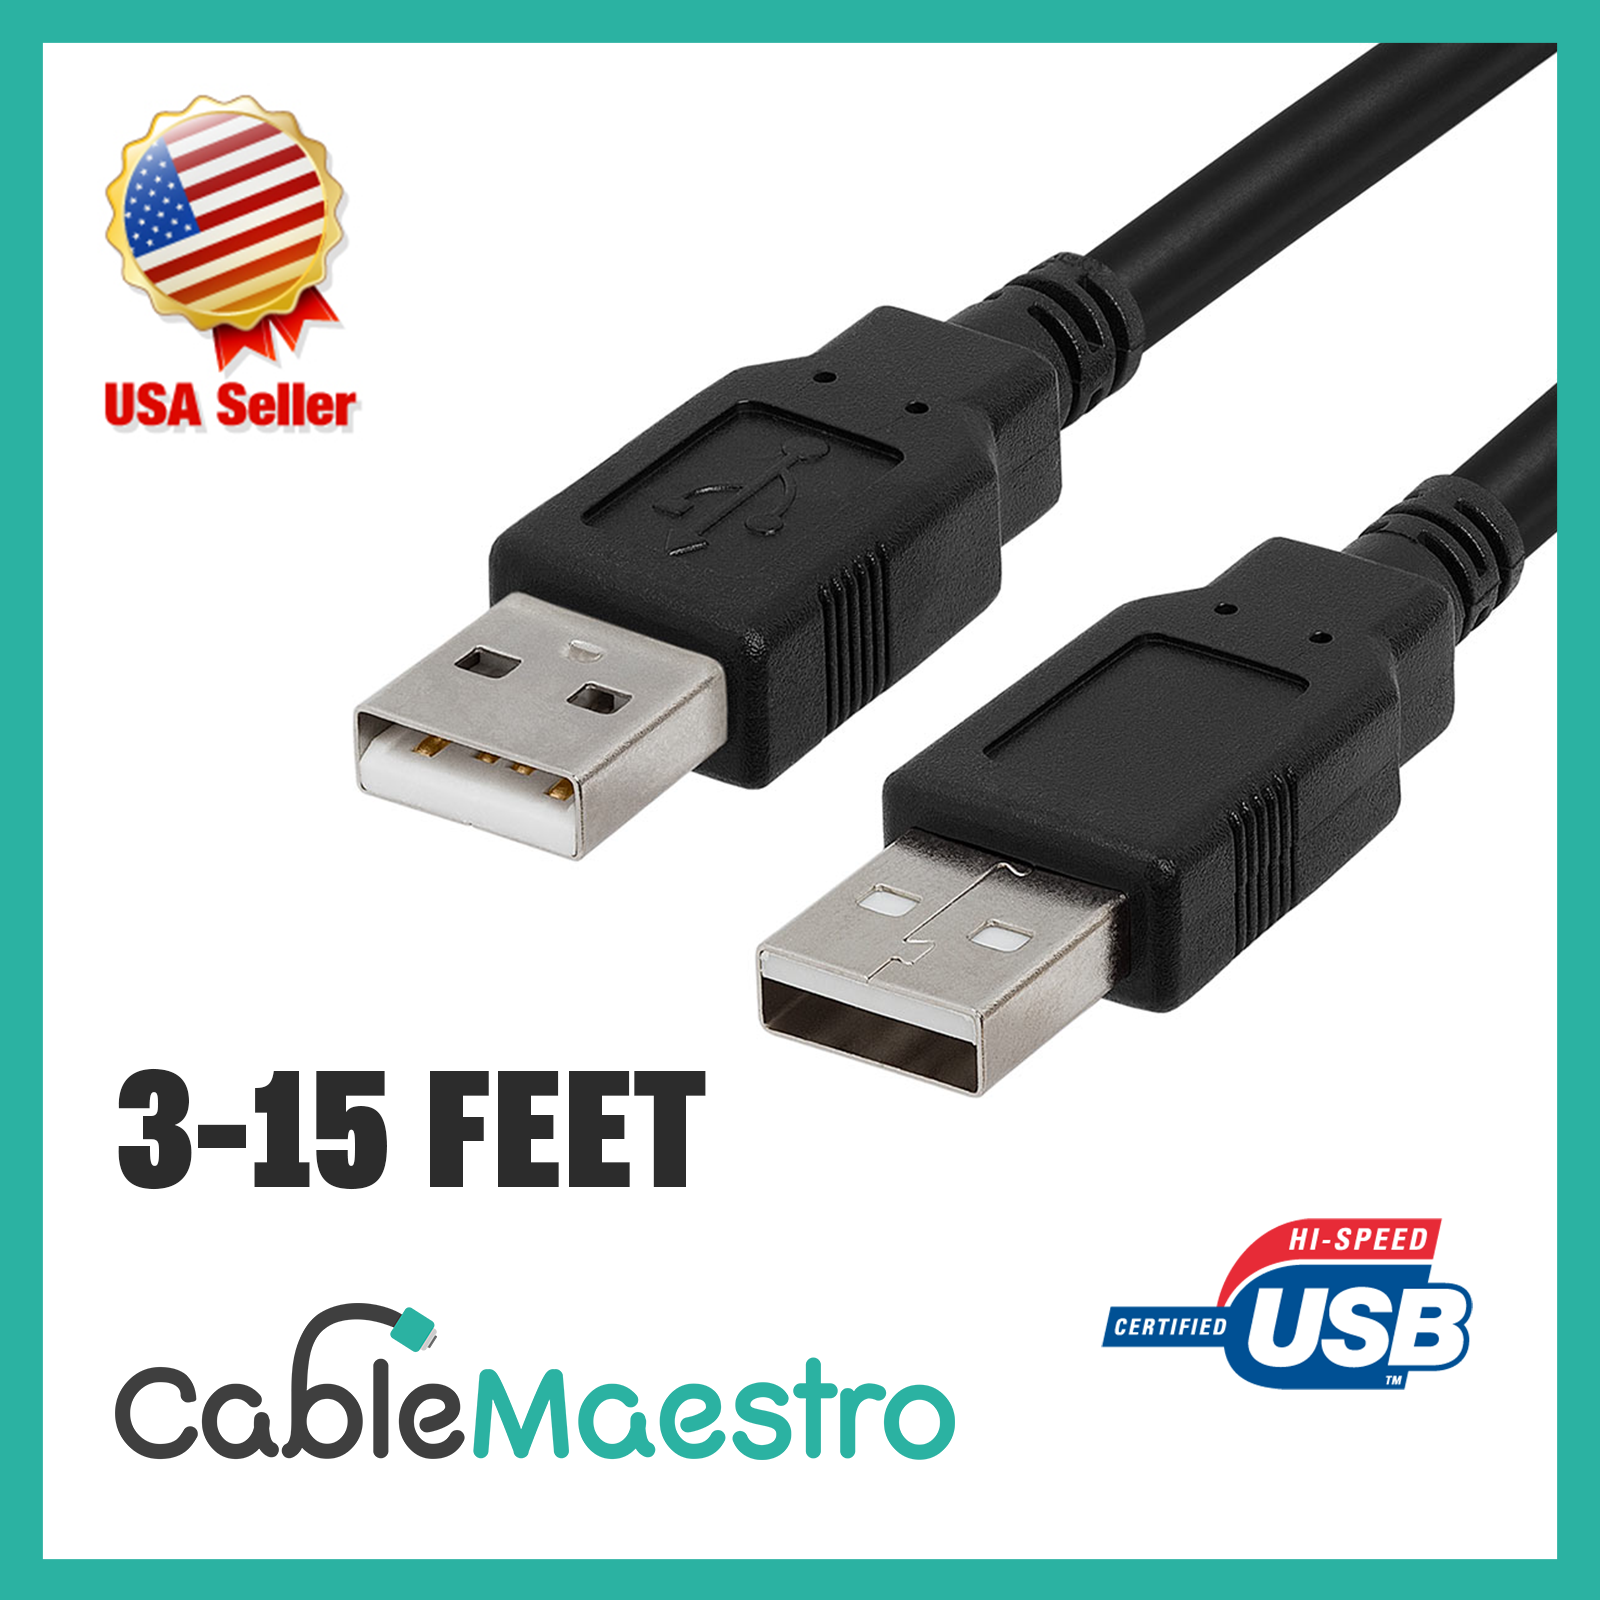 Usb 2.0 Printer Hard Drive Cable Cord Type A Male To A Male 3-15ft High Speed